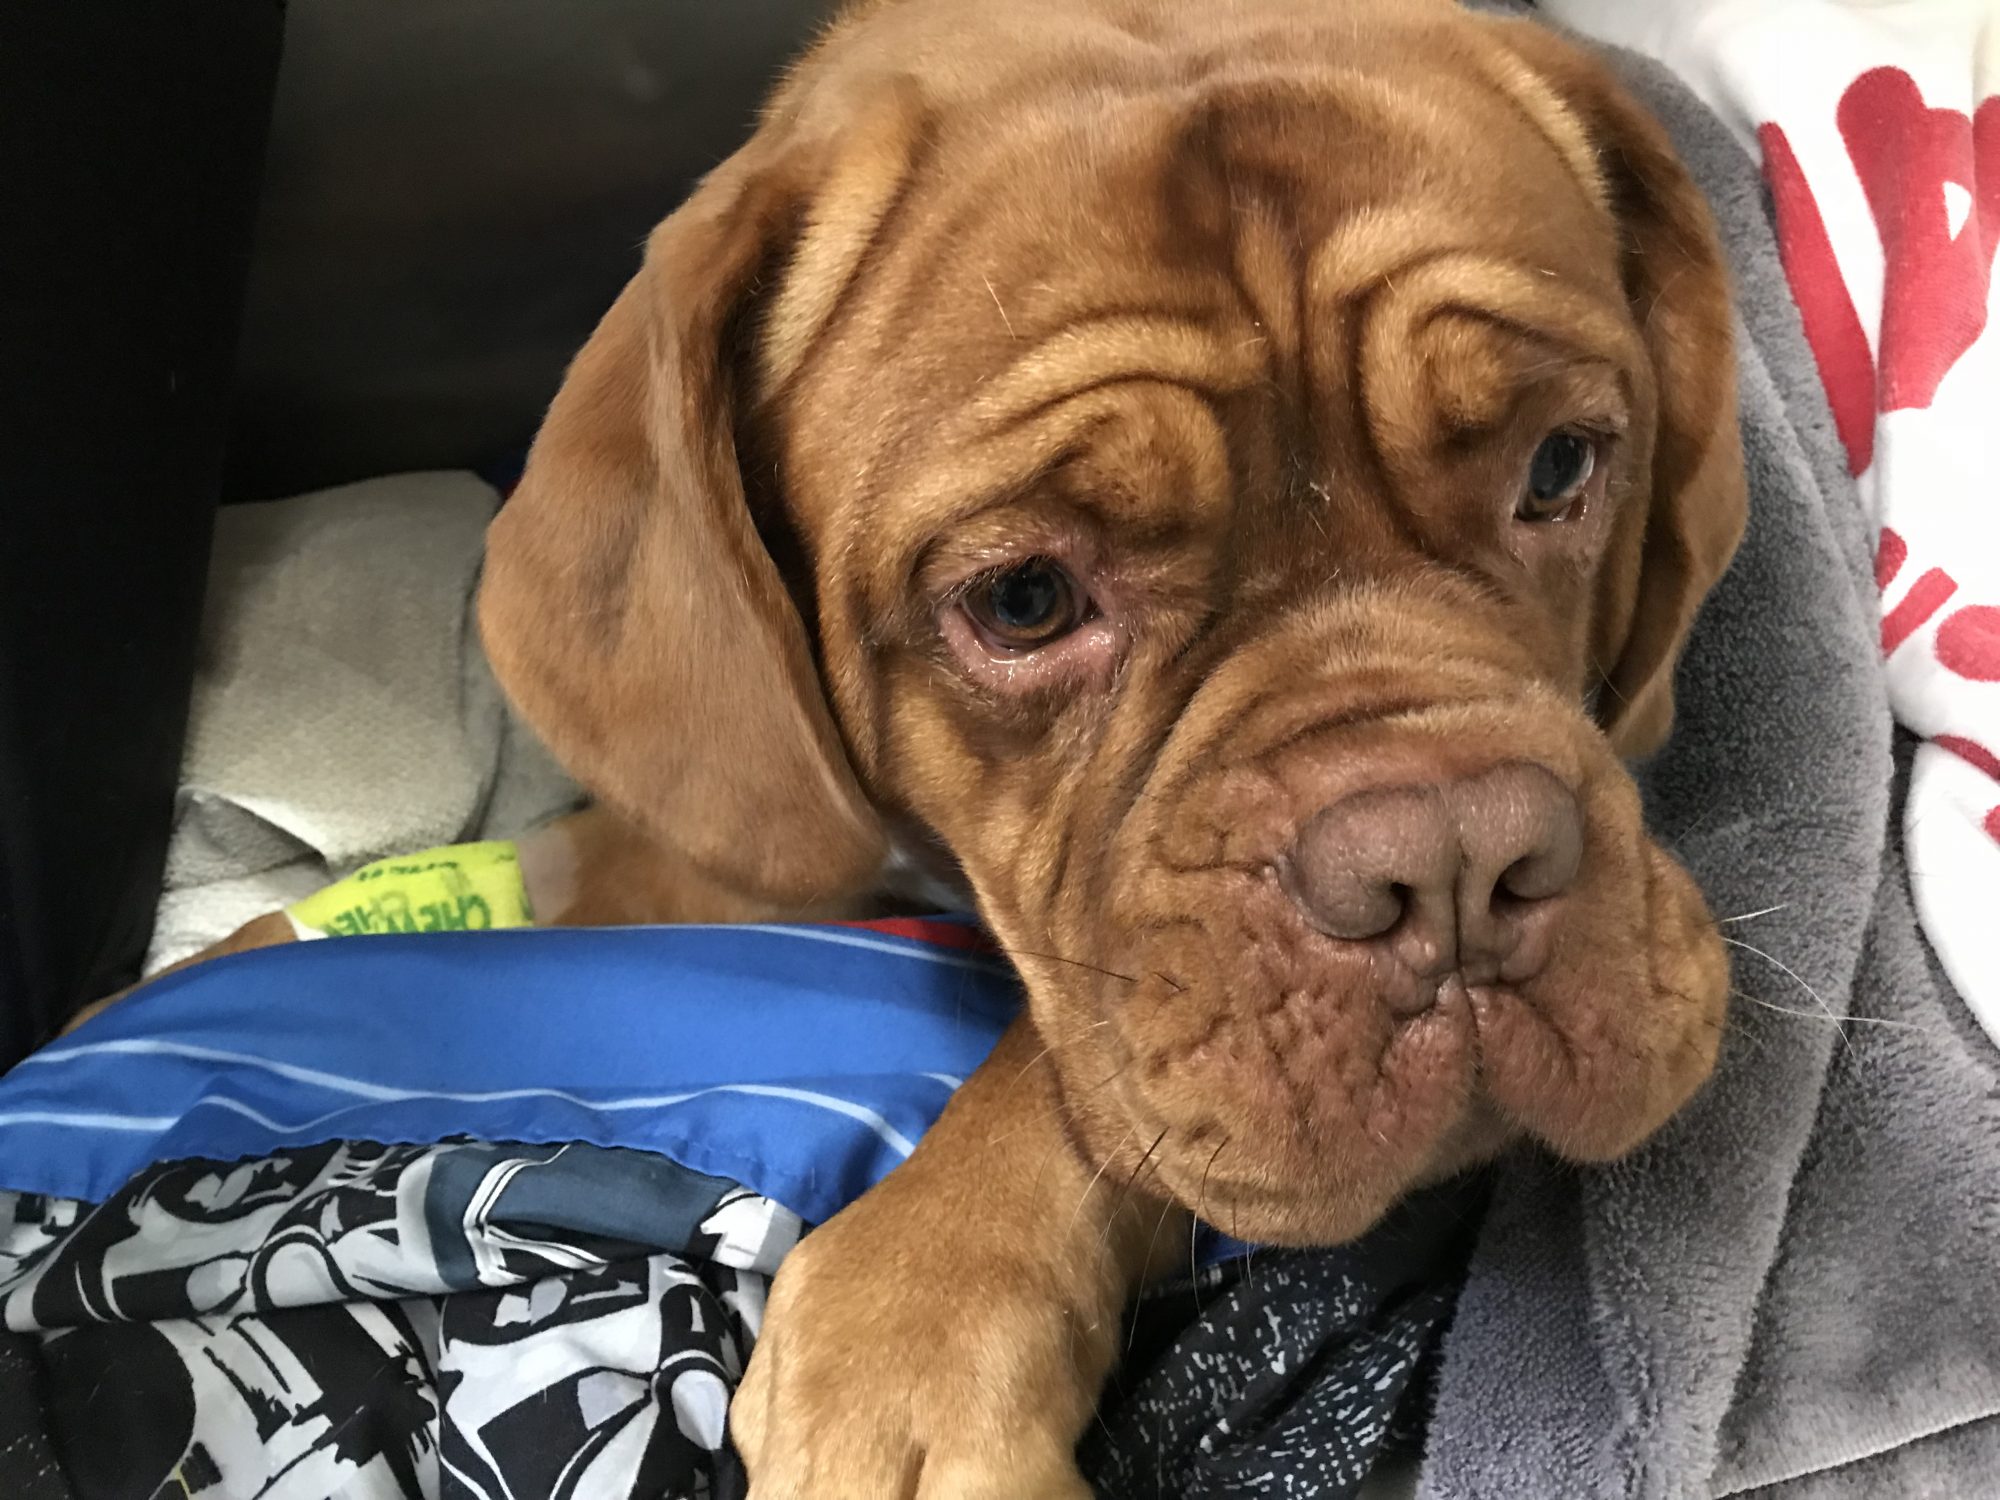 Ruby, a 2 year old Dogue de Bordeaux, wakes up from anesthesia after a TPLO to address a tear of her ACL